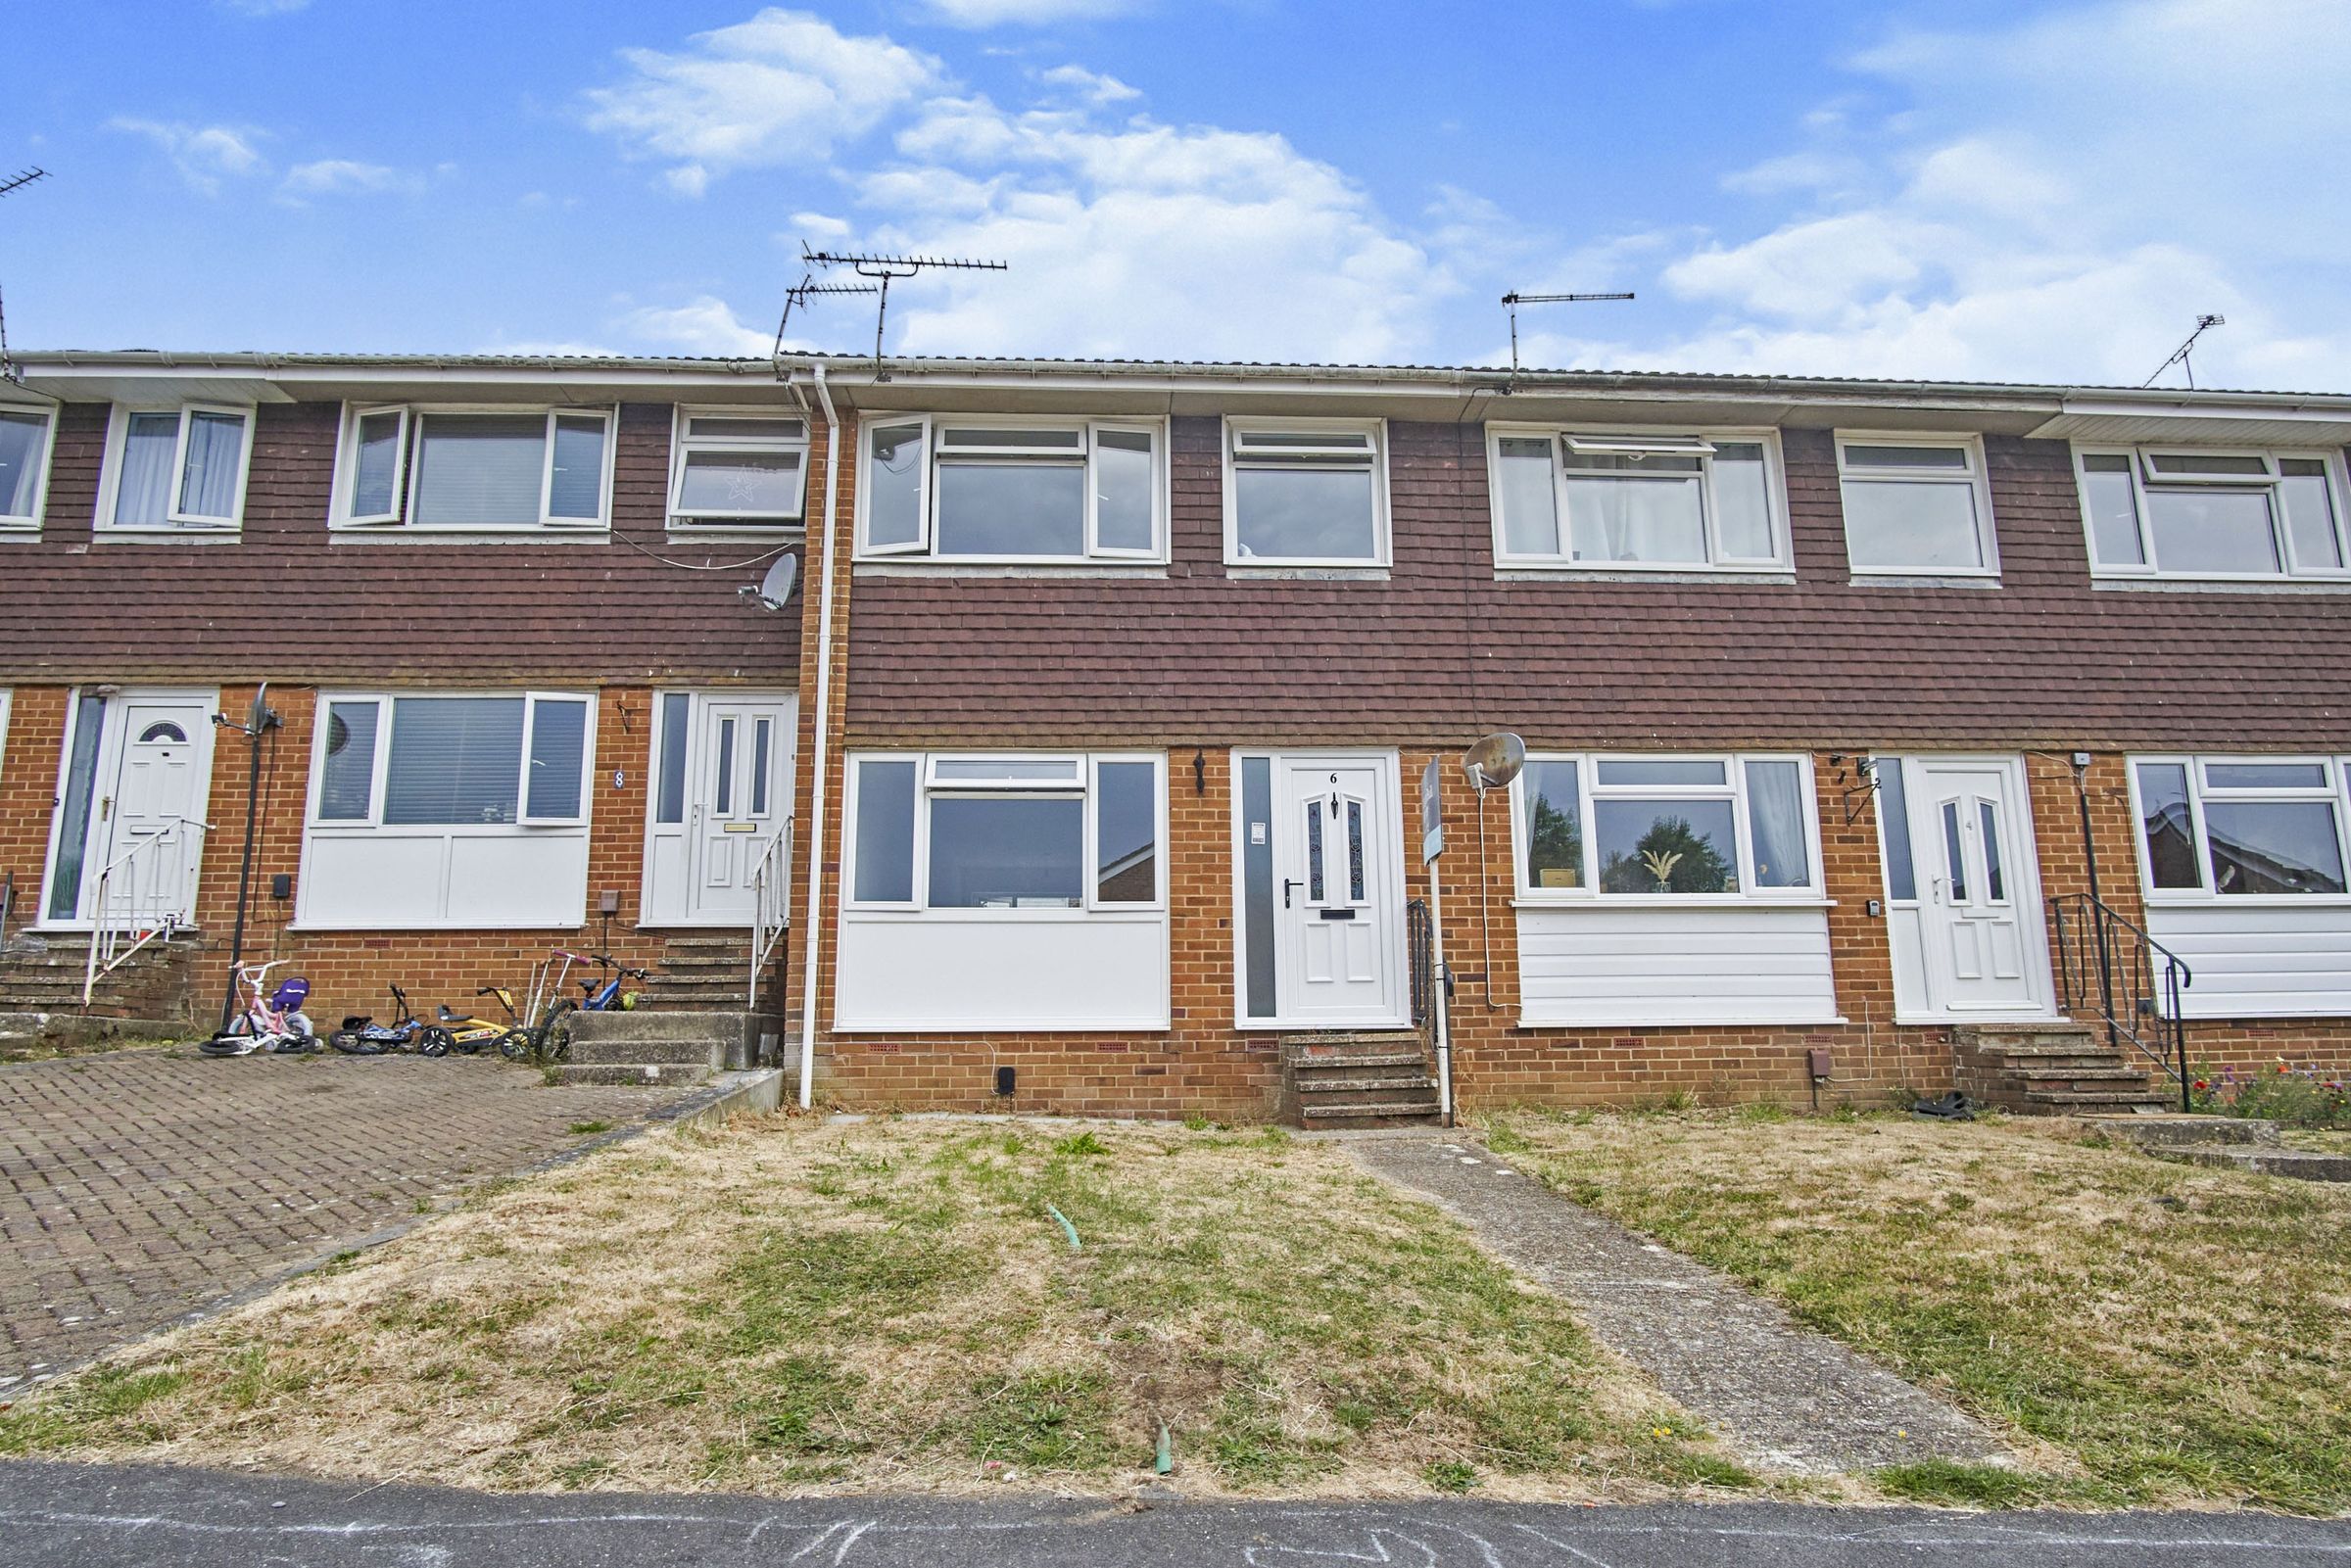 3 bed terraced house for sale in Fraser Close, Cowes PO31 - Zoopla